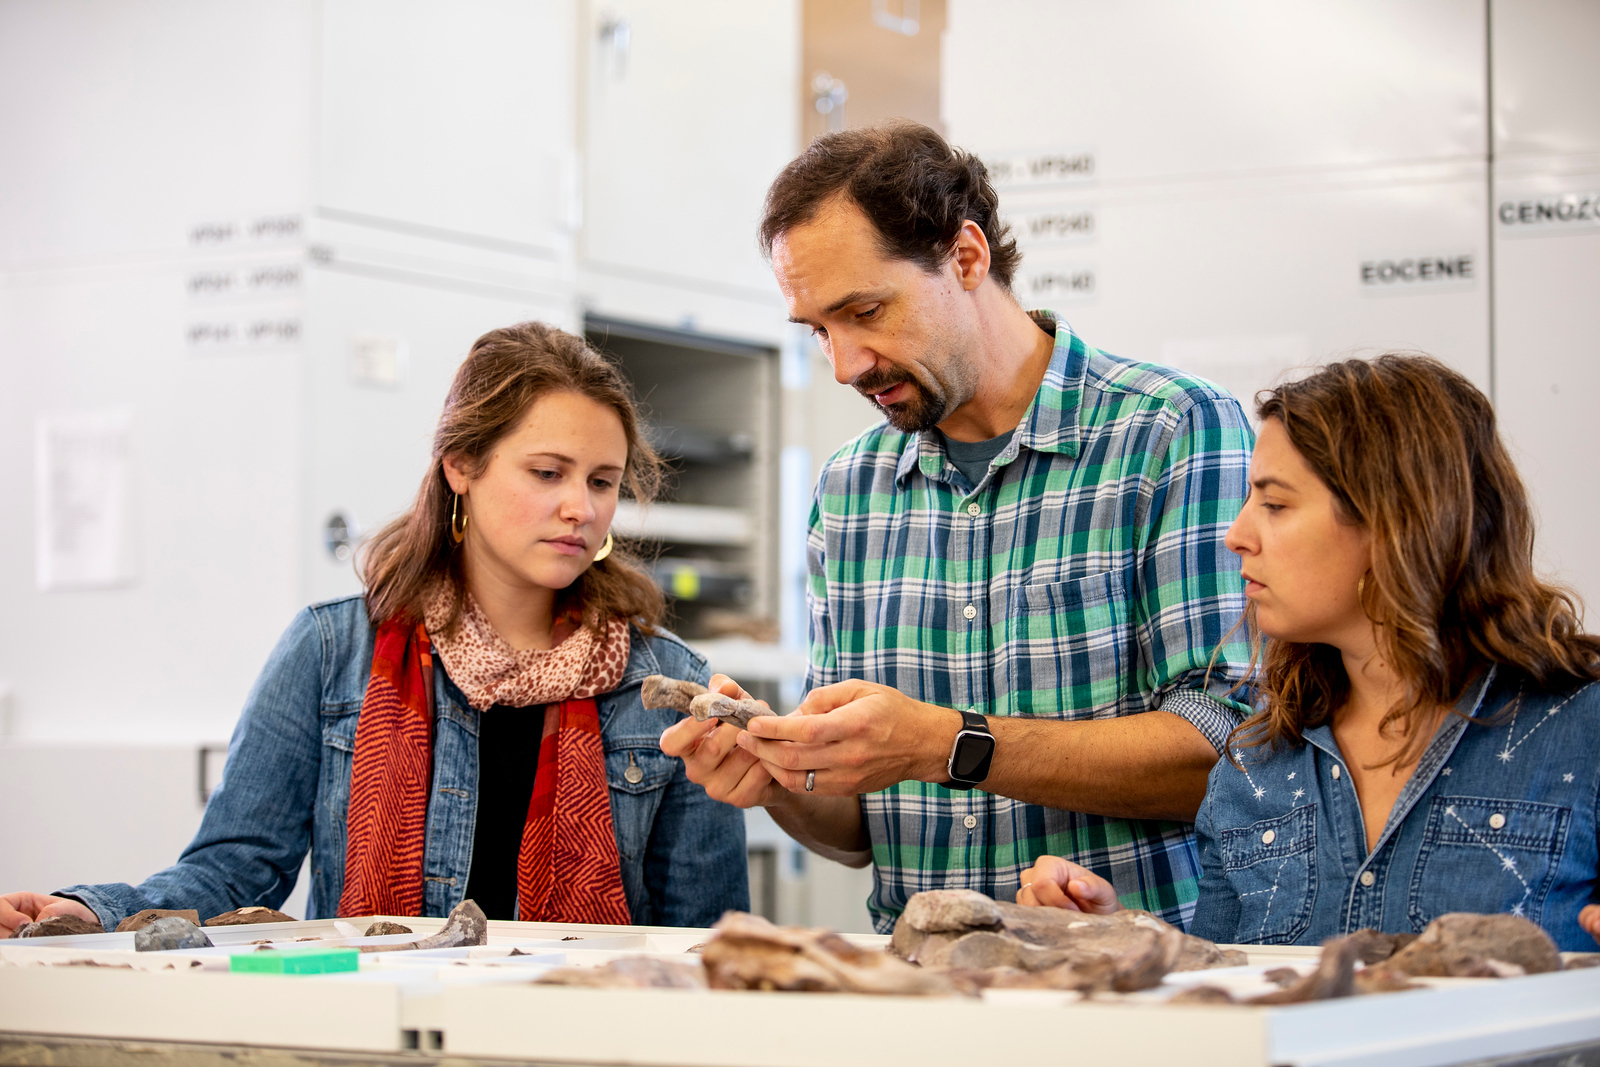 A man and two women examine fossils in a brightly lit lab